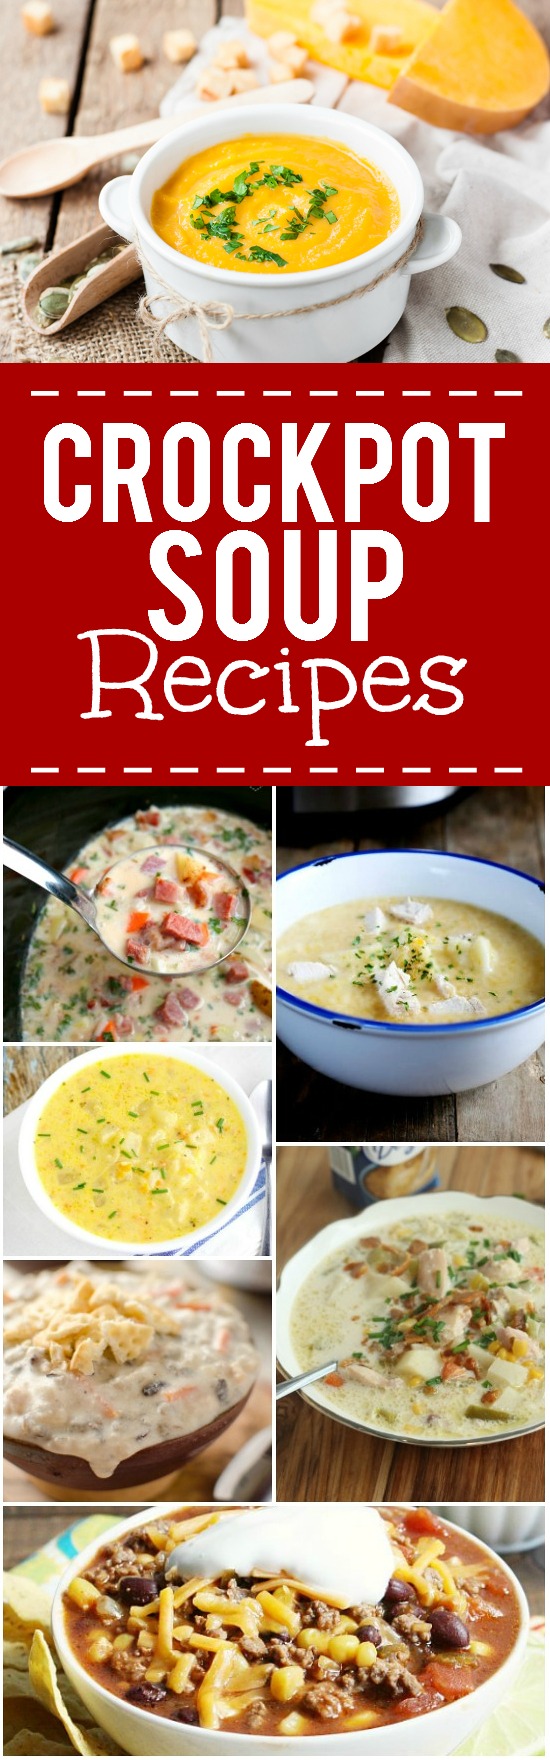 44 Crock Pot Soup Recipes - Find 44 of the BEST Crock Pot Soup recipes to cook and snuggle up with this cold season.  From creamy, cheesy chowders to chunky, hearty stews, there's something for everyone!